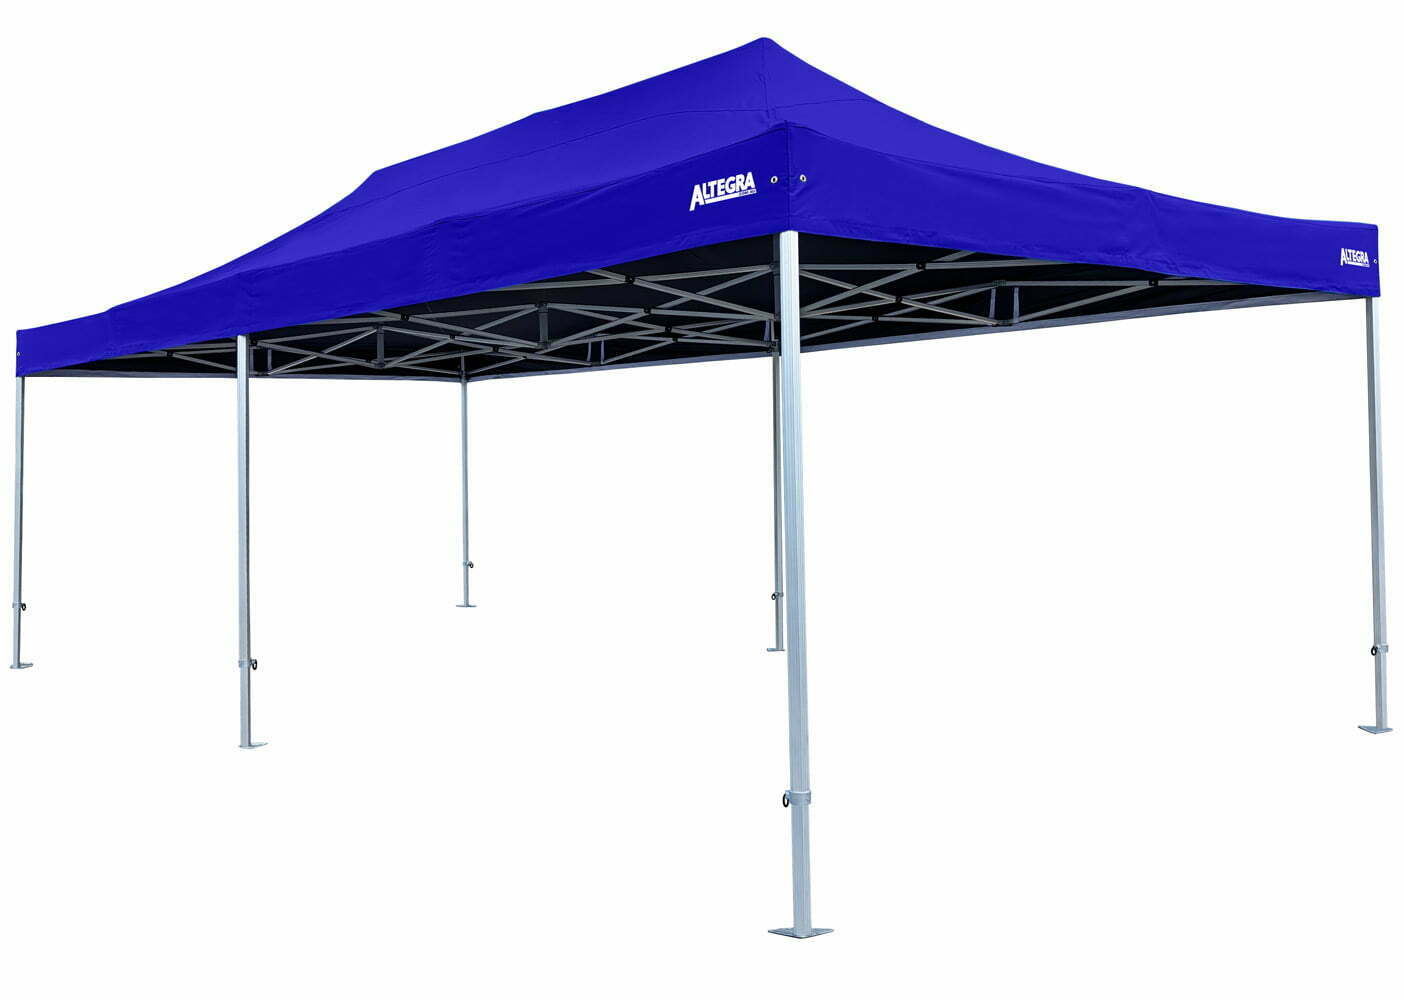 Altegra Heavy Duty 4x8m marquee in royal blue - our large portable folding event marquee that covers up to 50 people with 32m^2 sheltered area.